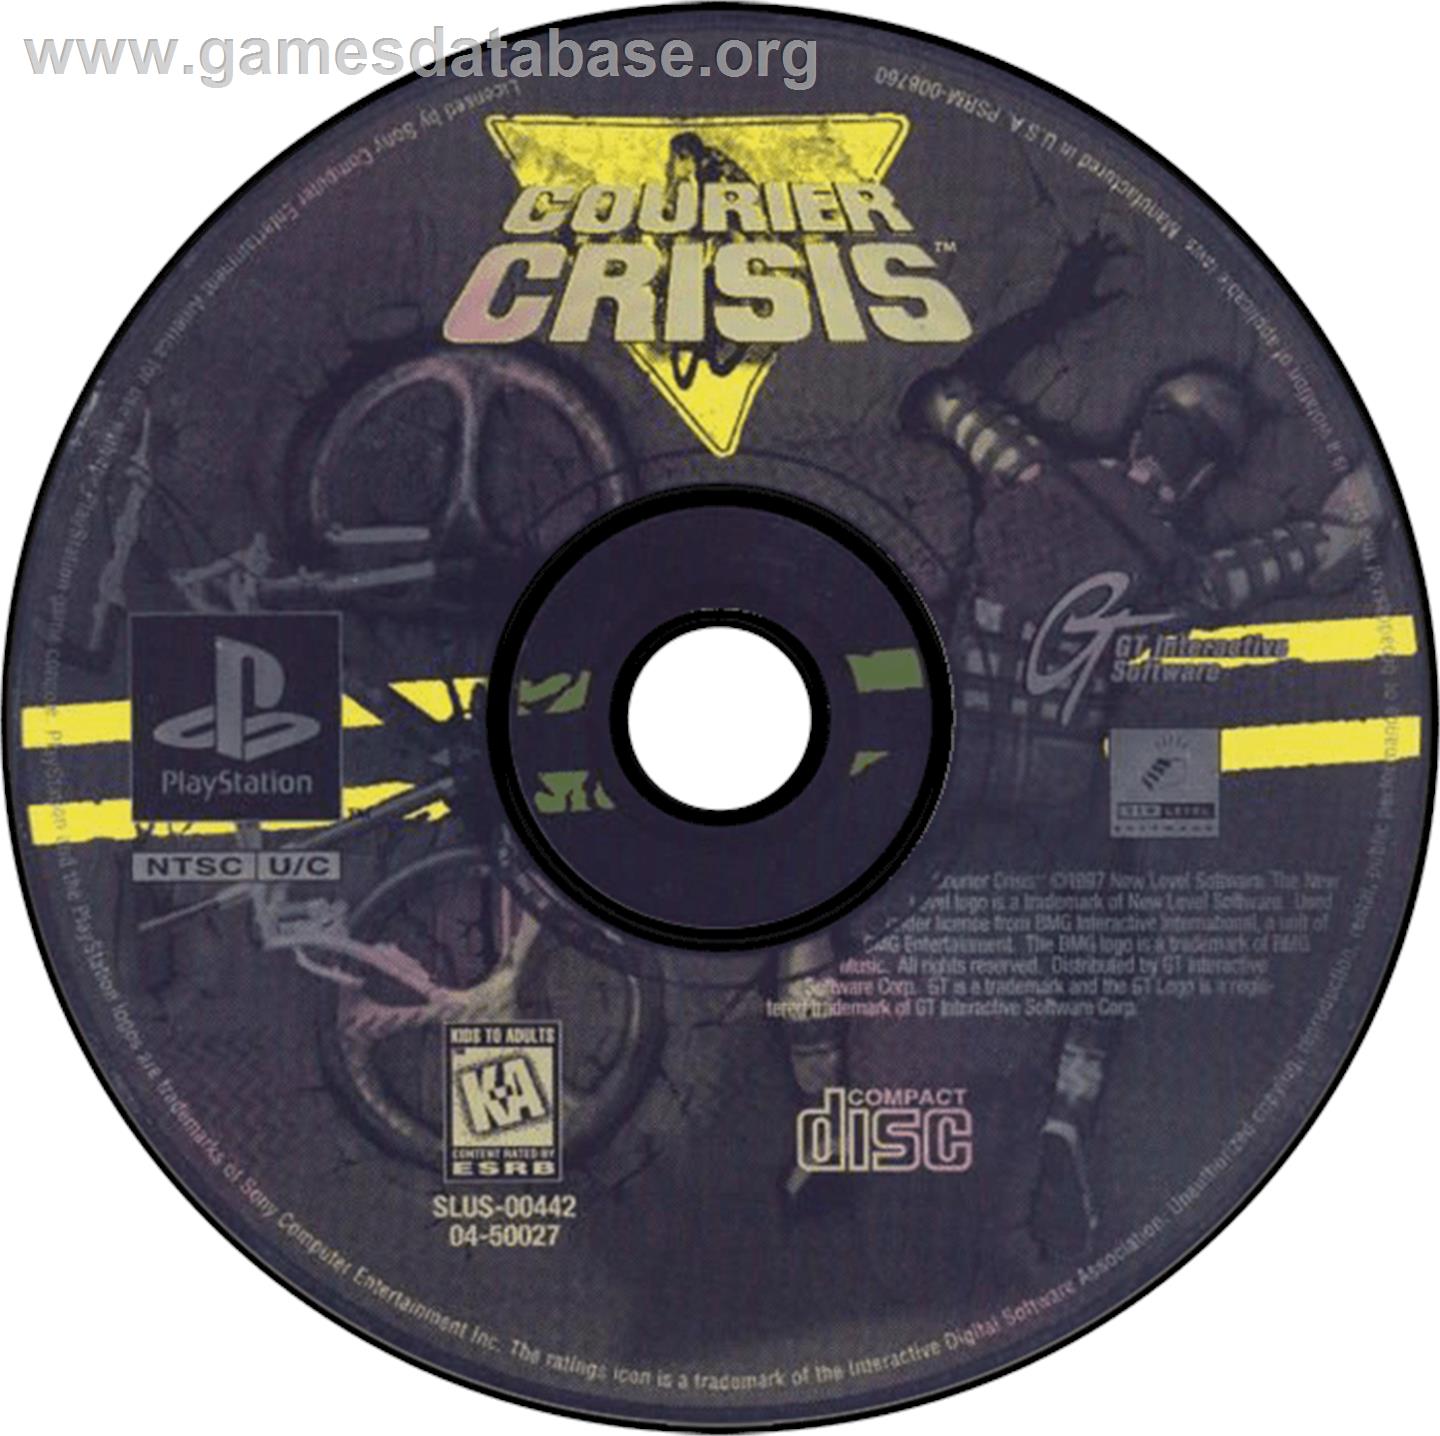 Courier Crisis - Sony Playstation - Artwork - Disc